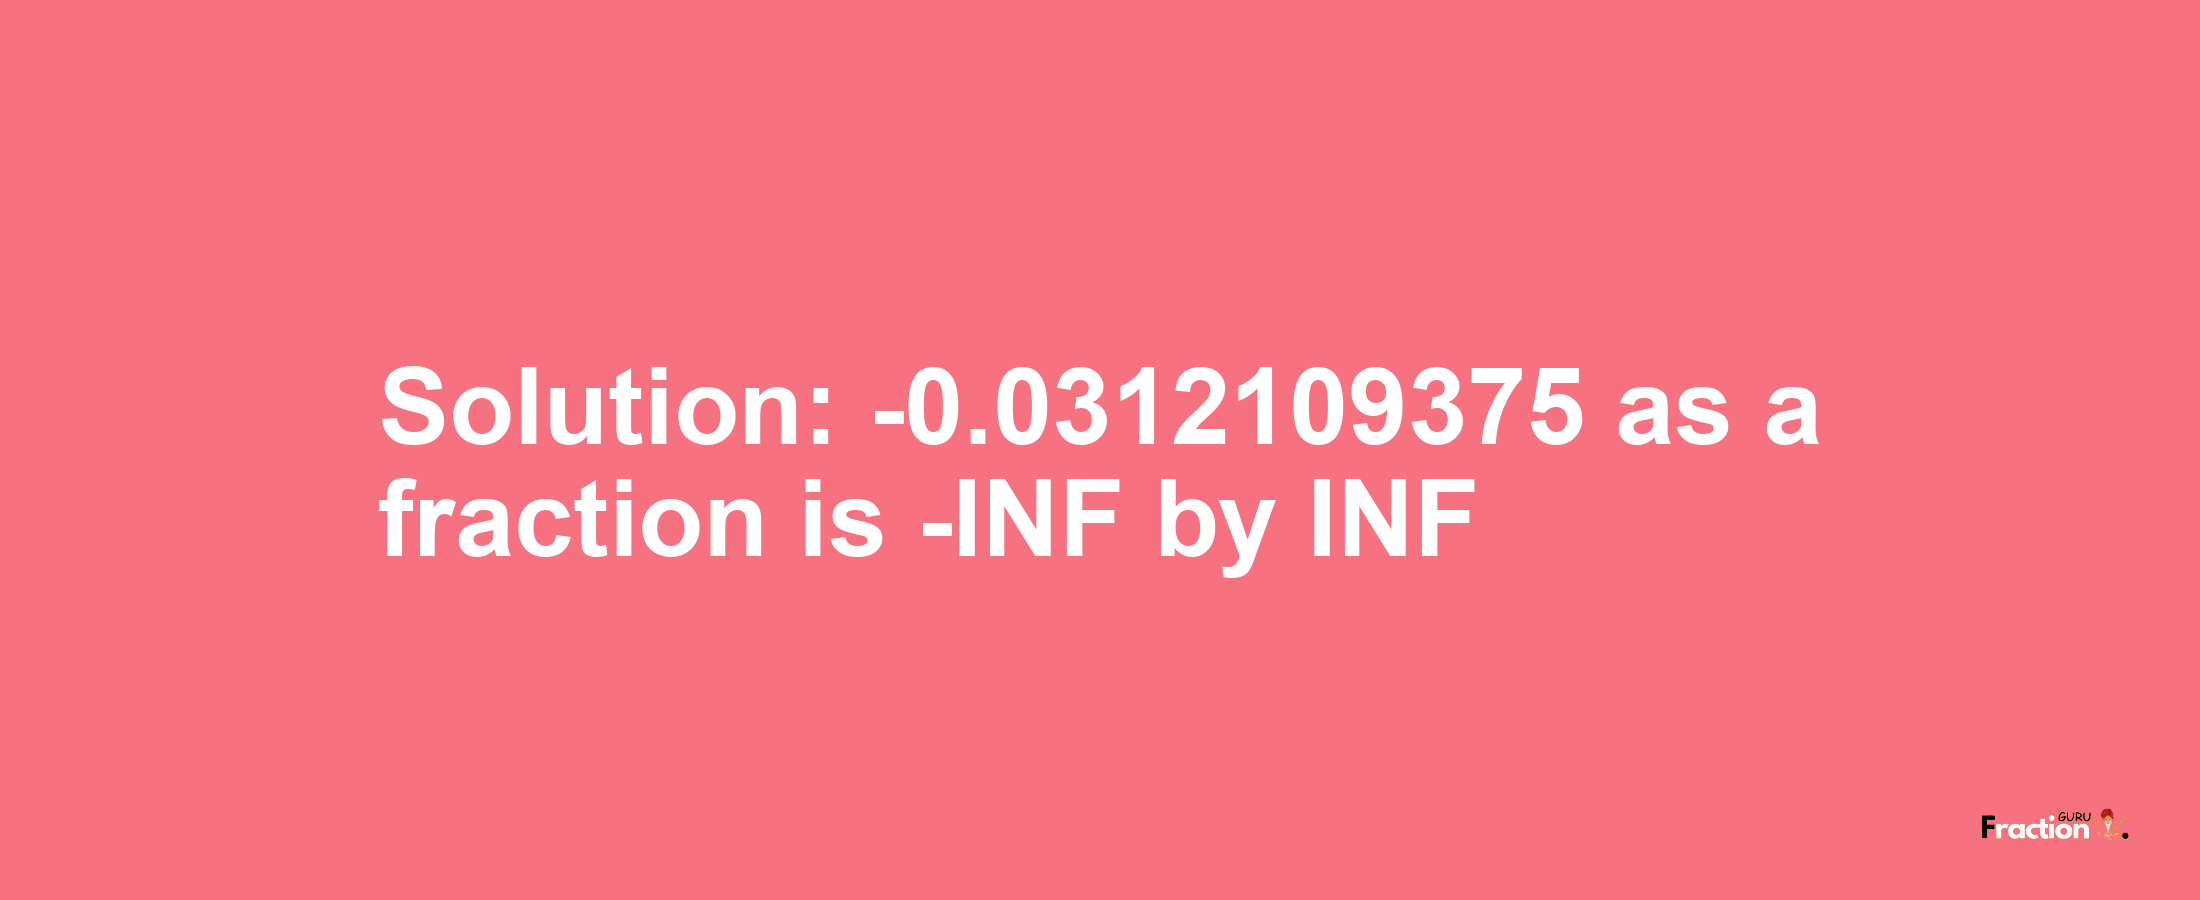 Solution:-0.0312109375 as a fraction is -INF/INF